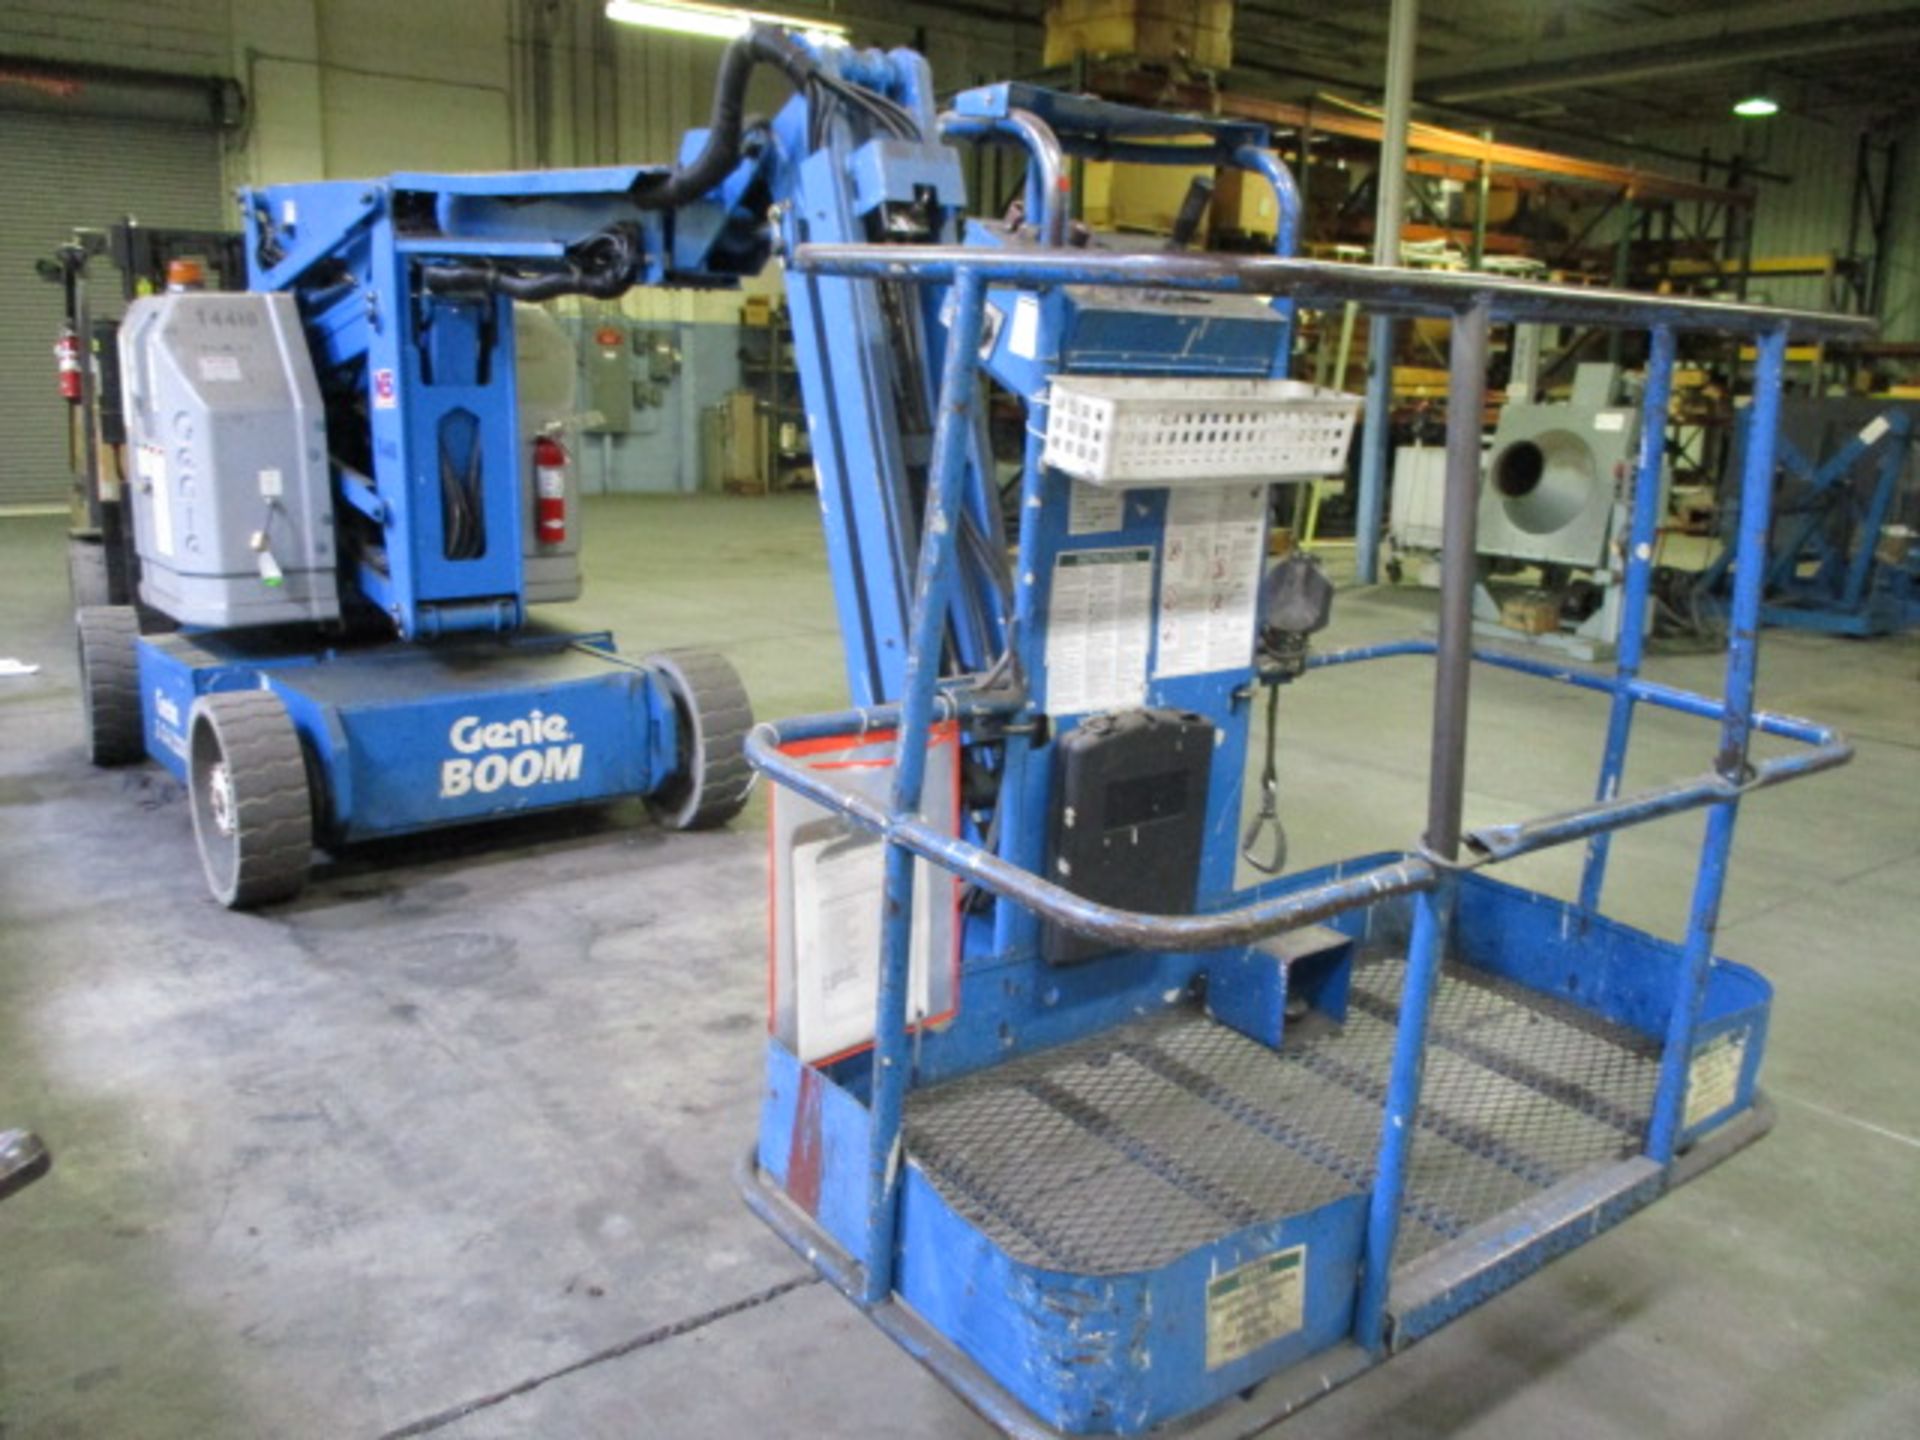 Genie Z-34/22N Electric Boom Lift with 34' Lift Height, Basket, Controls, sn:2061, mfg.1999 - Image 6 of 9